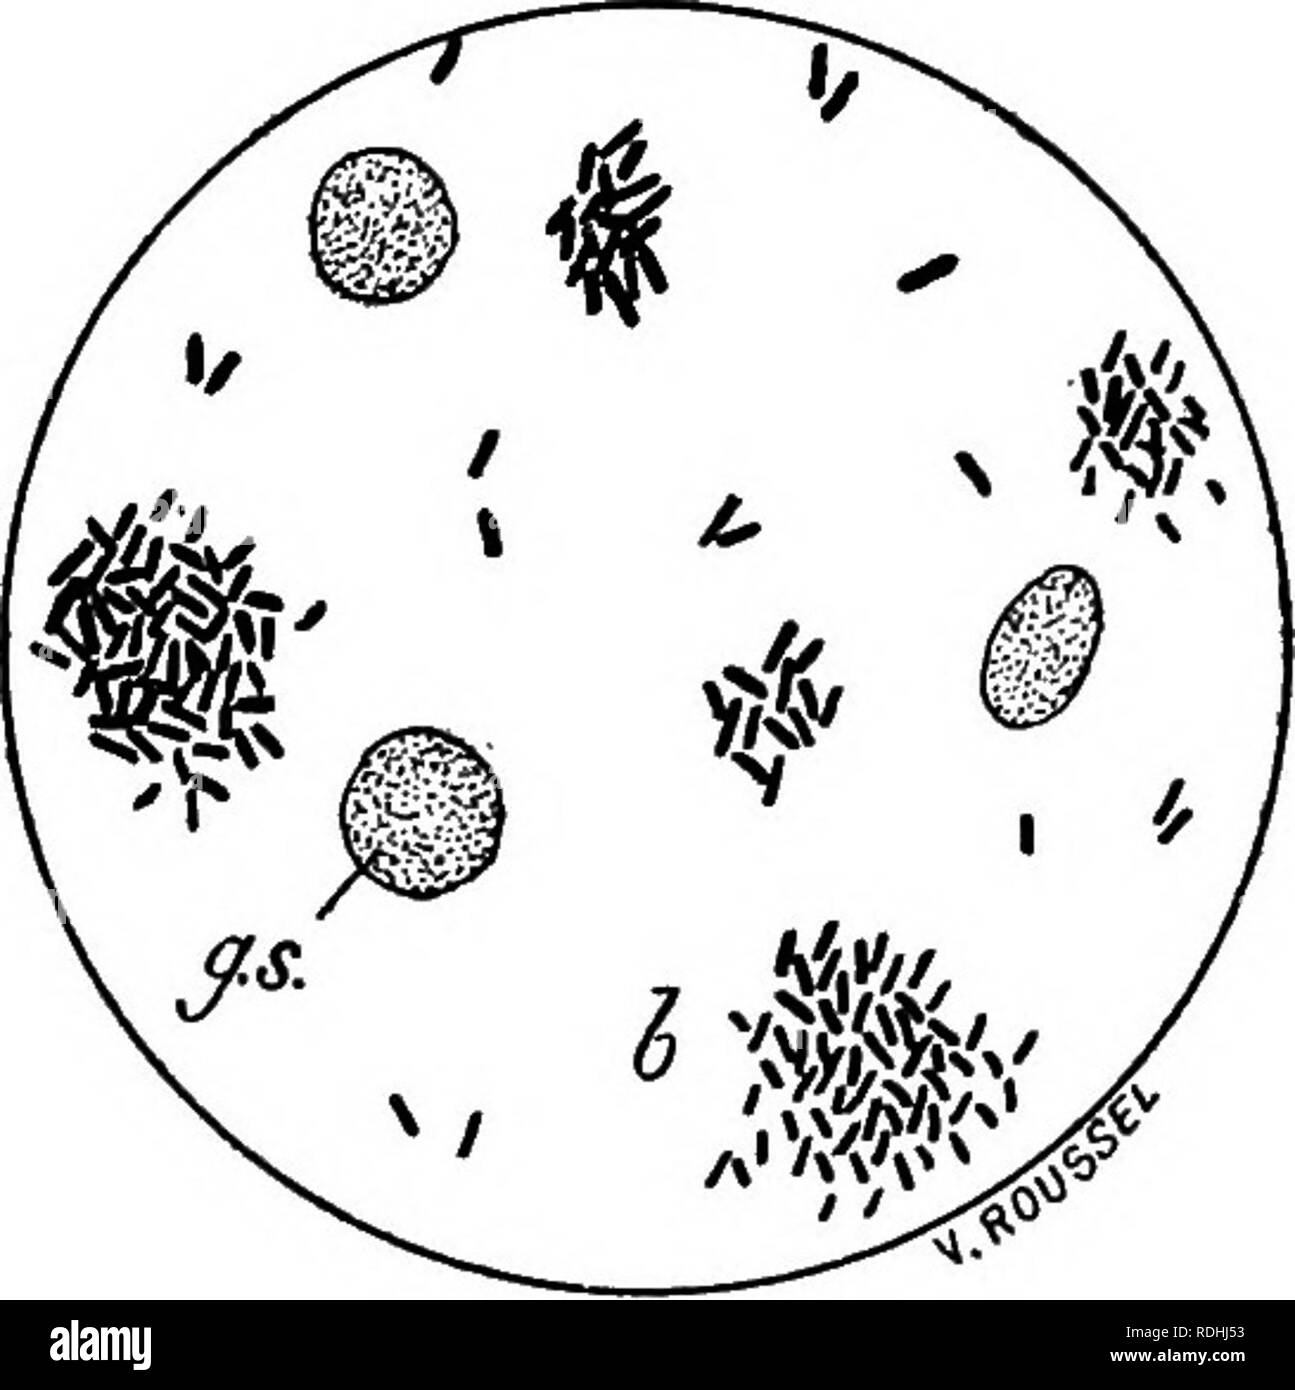 . Microbes &amp; toxins. Bacteriology; Toxins; Antitoxins. APPLICATIONS OF BACTERIOLOGY 253. Fig. 71.—Agglutination of the typhoid bacillus by the serum of a typhoid patient: b, clump of bacilli : g.s., blood corpuscles left in the serum. throughout the liquid; the suspension is &quot;homogeneous.&quot; If a trace of serum is added from an animal prepared by injections of typhoid bacilli or from a patient suffering from typhoid fever, the bacilli lose their motility and collect into masses: they are said to become agglutinated by the serum. If the serum is added to a broth culture floccules ca Stock Photo